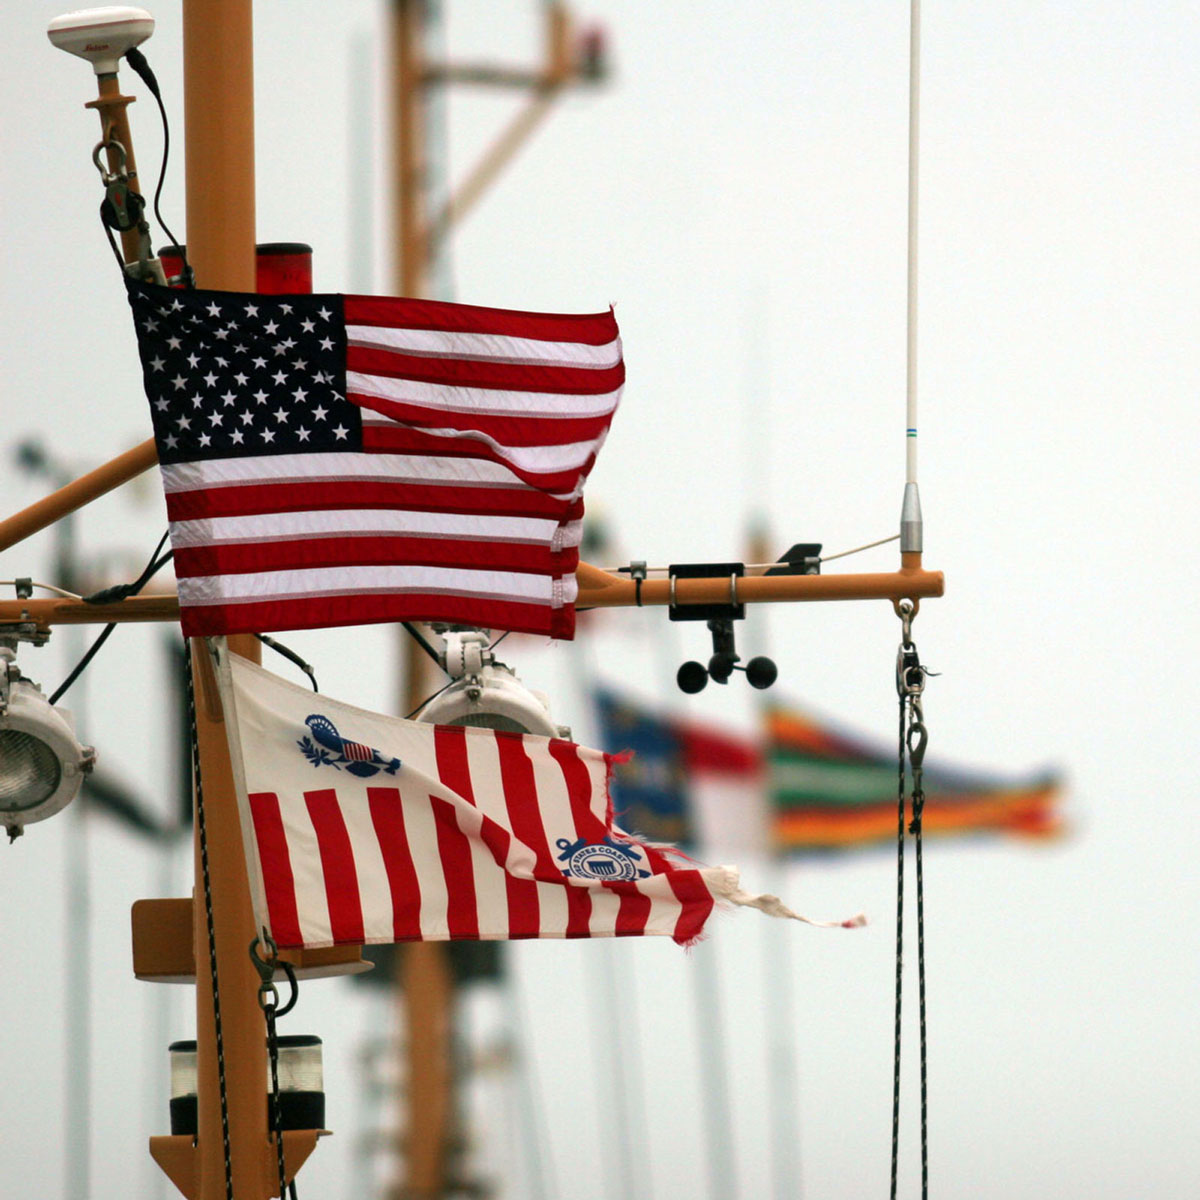 Flags flutter in the wind from the side of sails